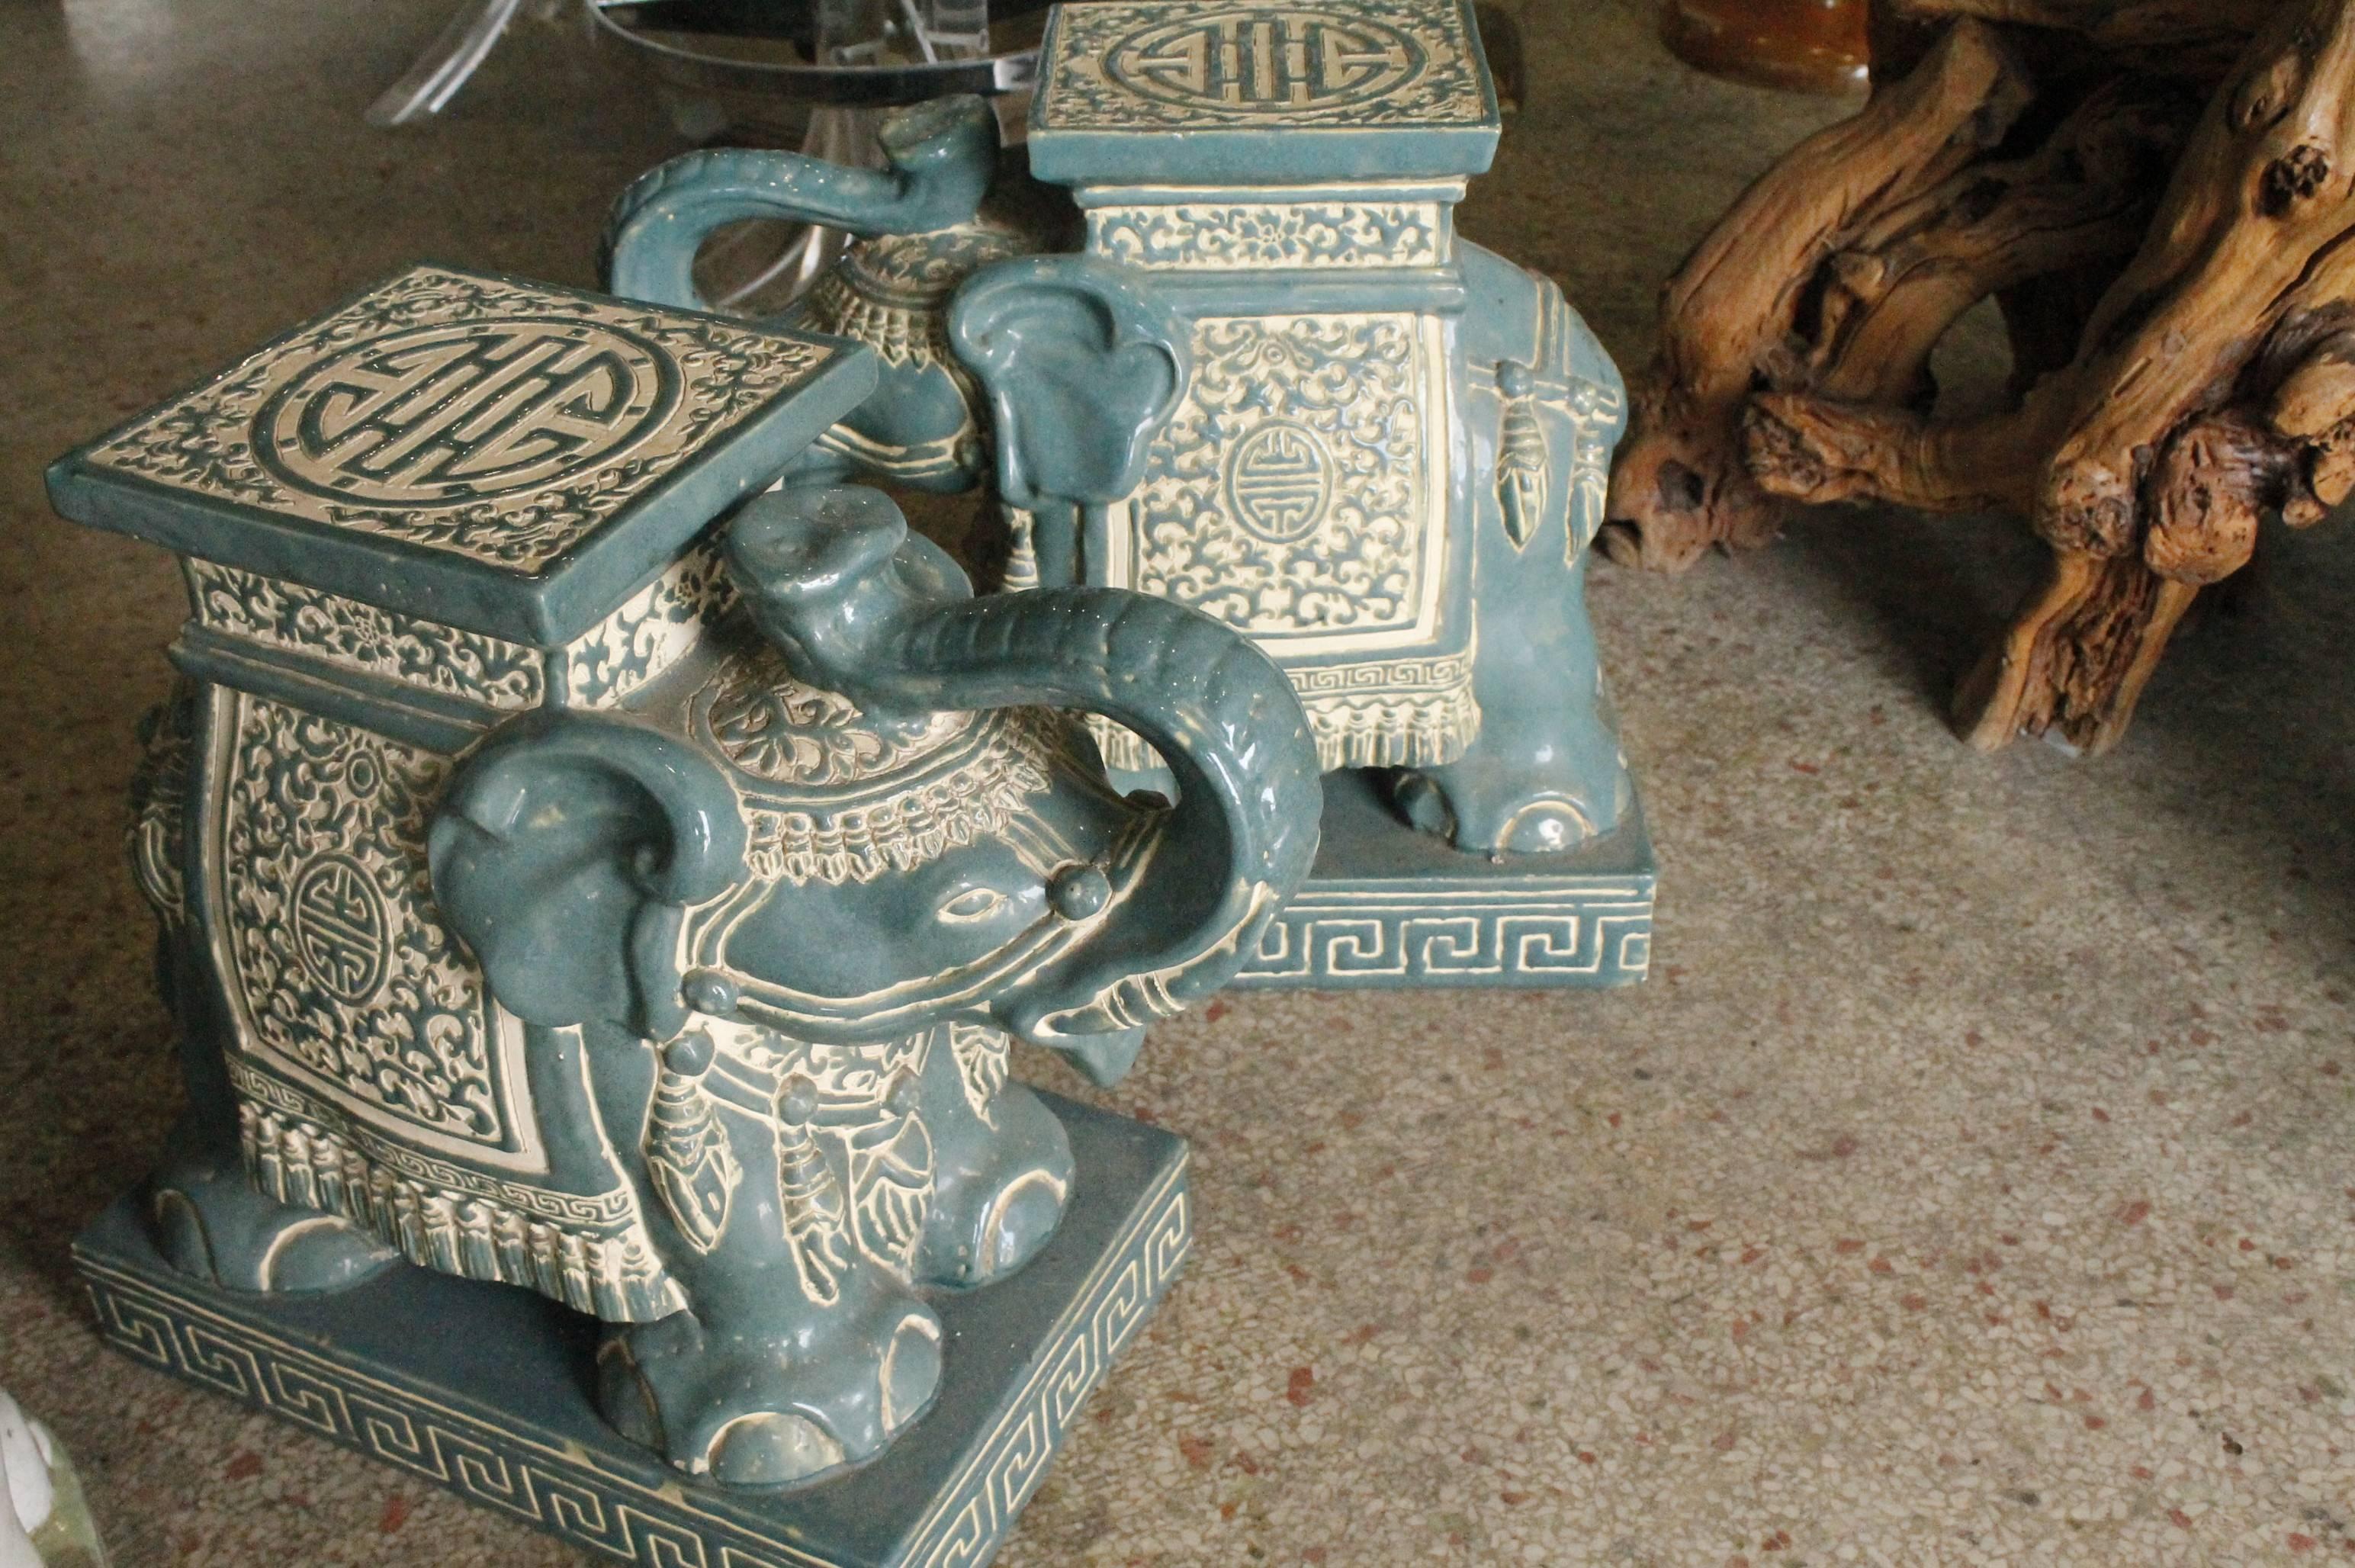 Great teal blue green color pair of vintage elephants. No chips or breaks.